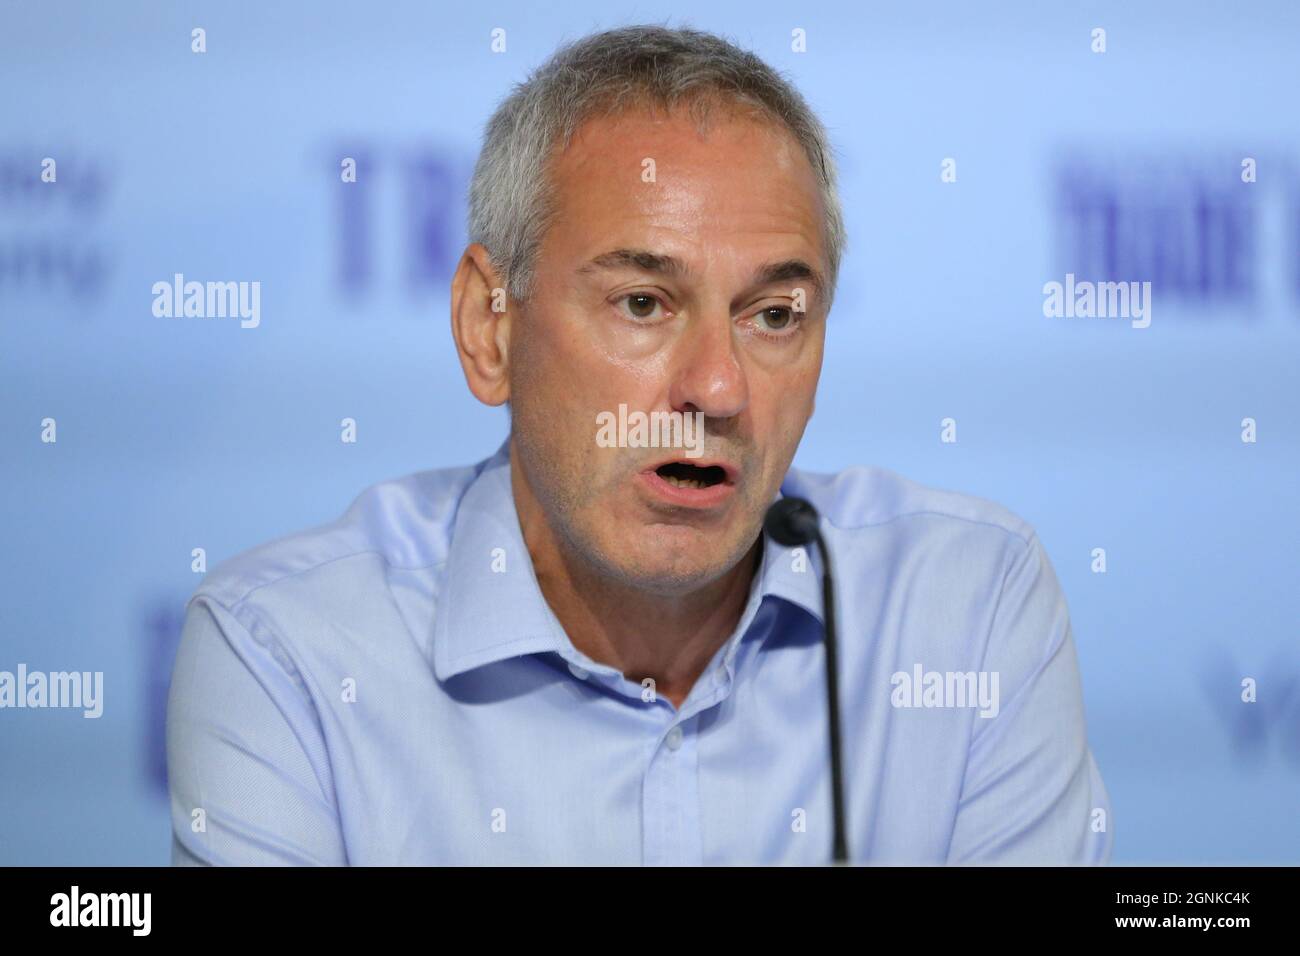 KEVIN MAGUIRE, 2021 Stock Photo